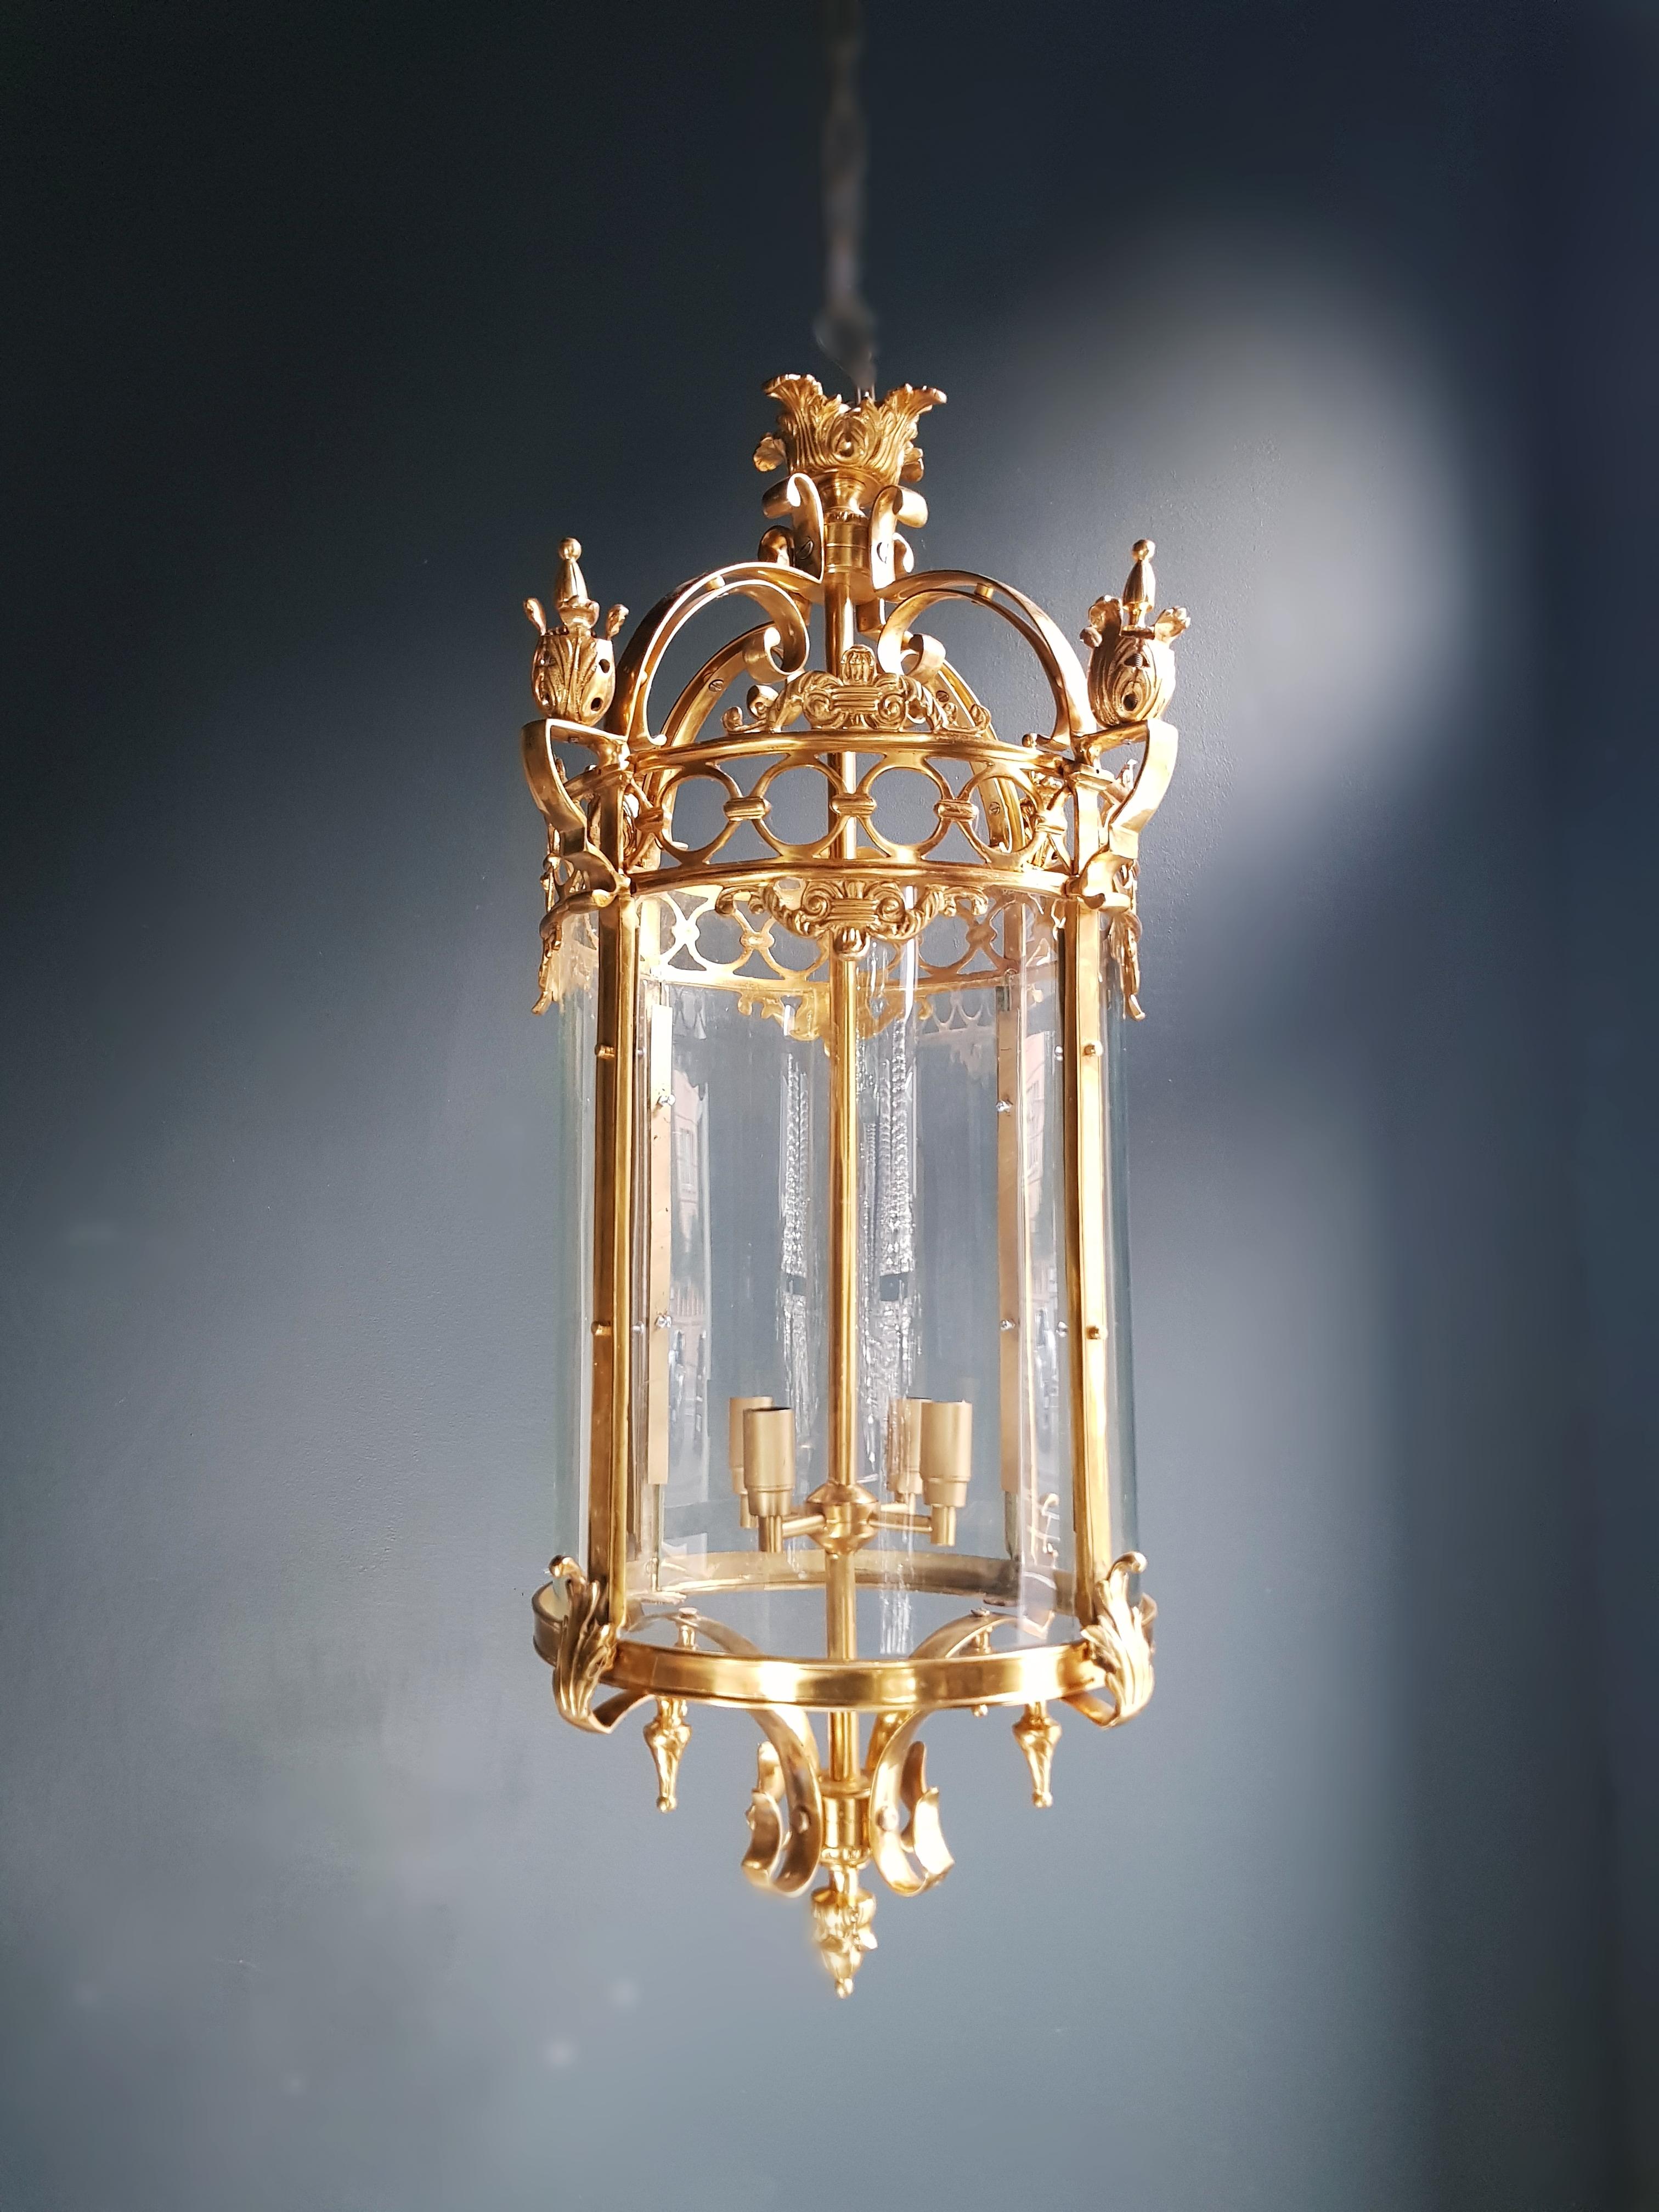 European Large Cylindrical Lantern in Louis XVI Style Brass Glass Pendant Lighting For Sale